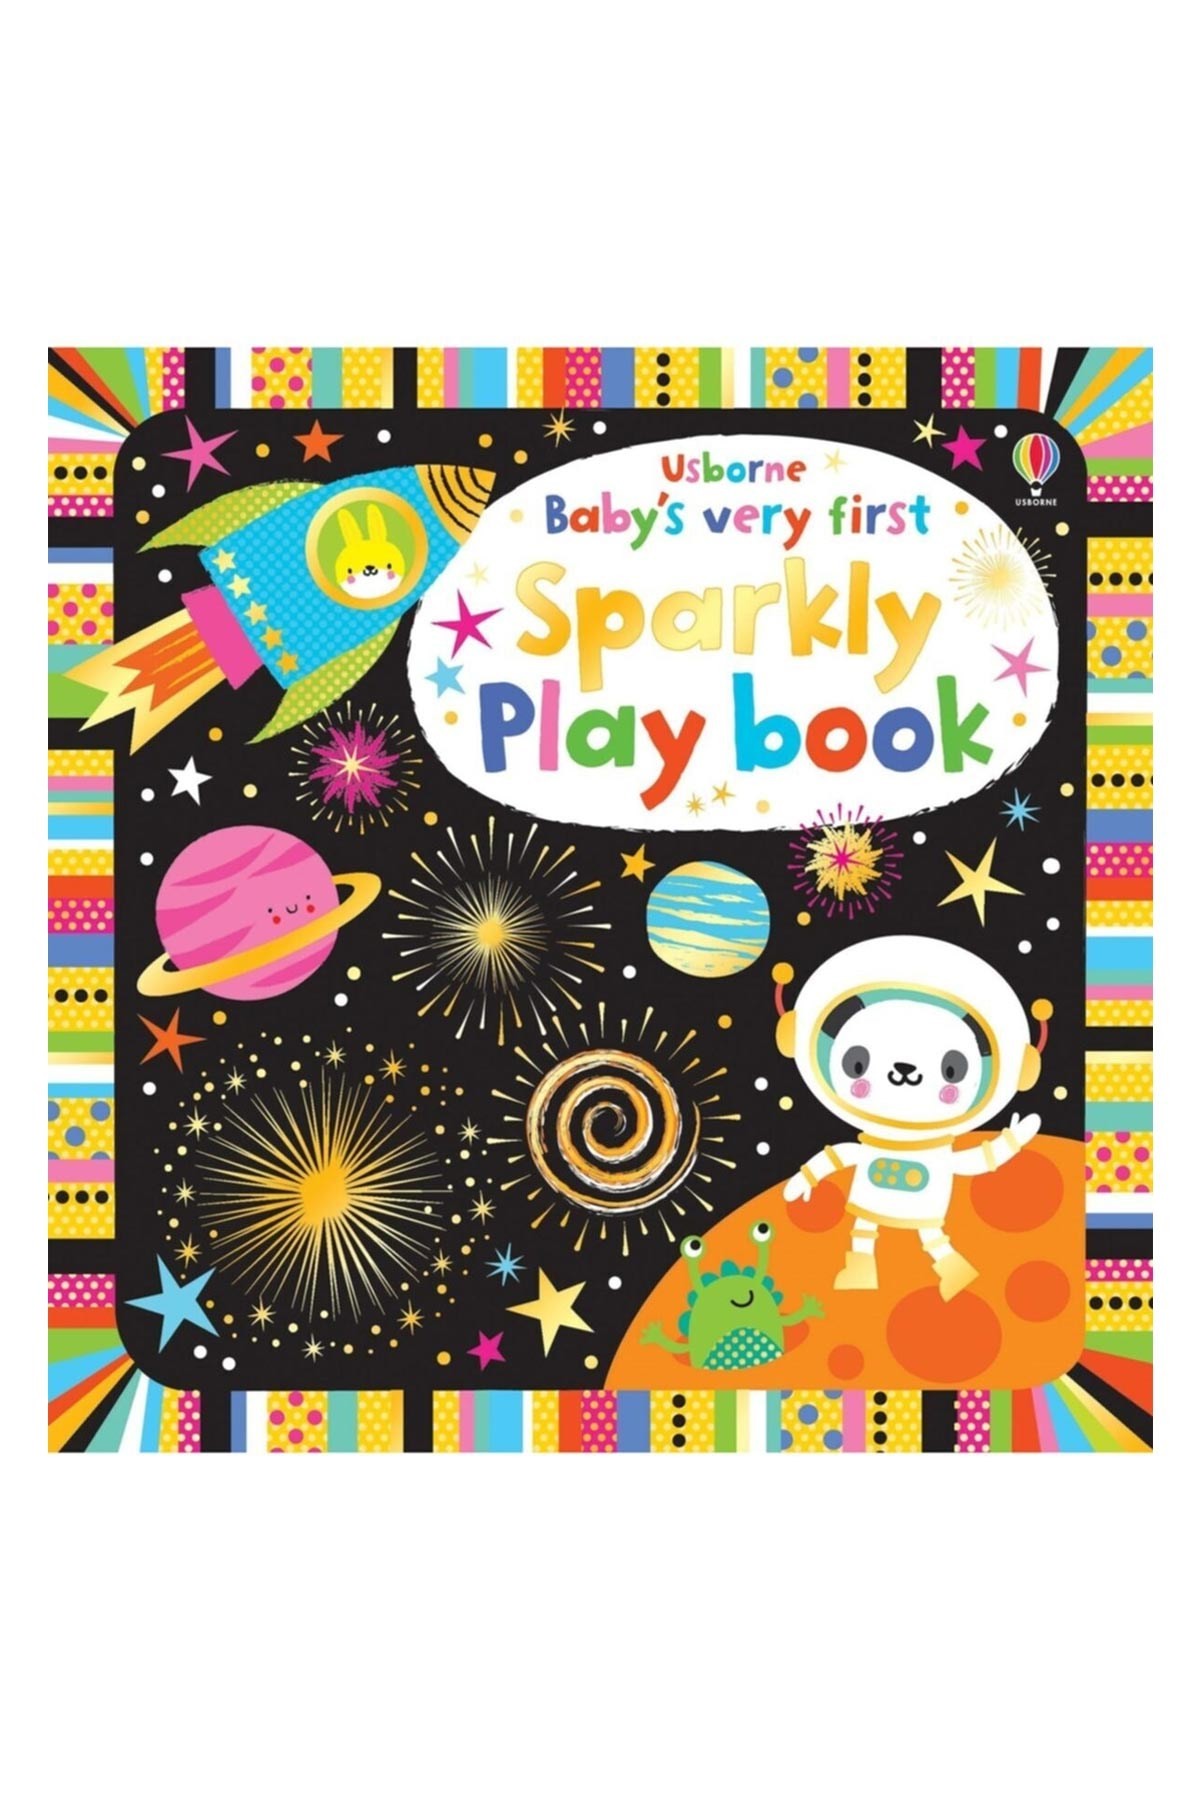 The Usborne Baby's Very First Sparkly Playbook